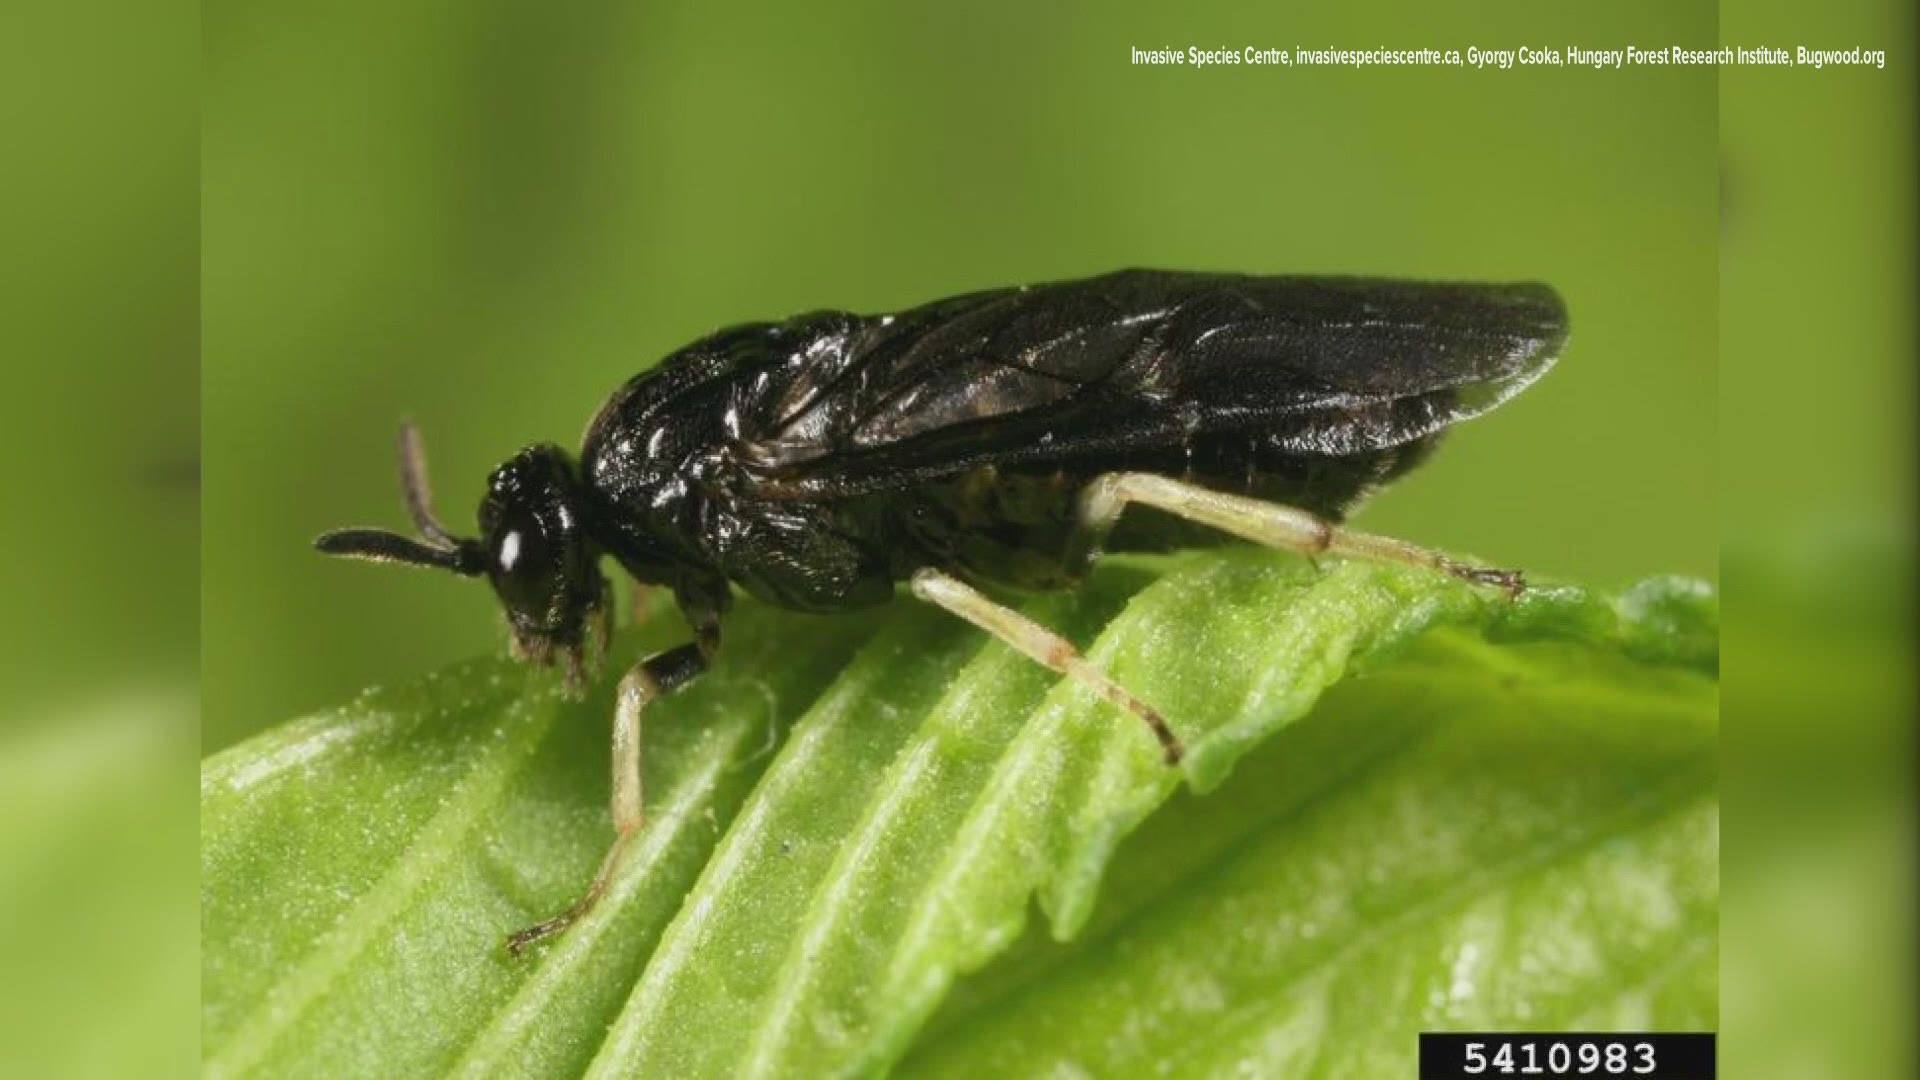 Forest officials are asking folks to report any signs of the elm zigzag sawfly.